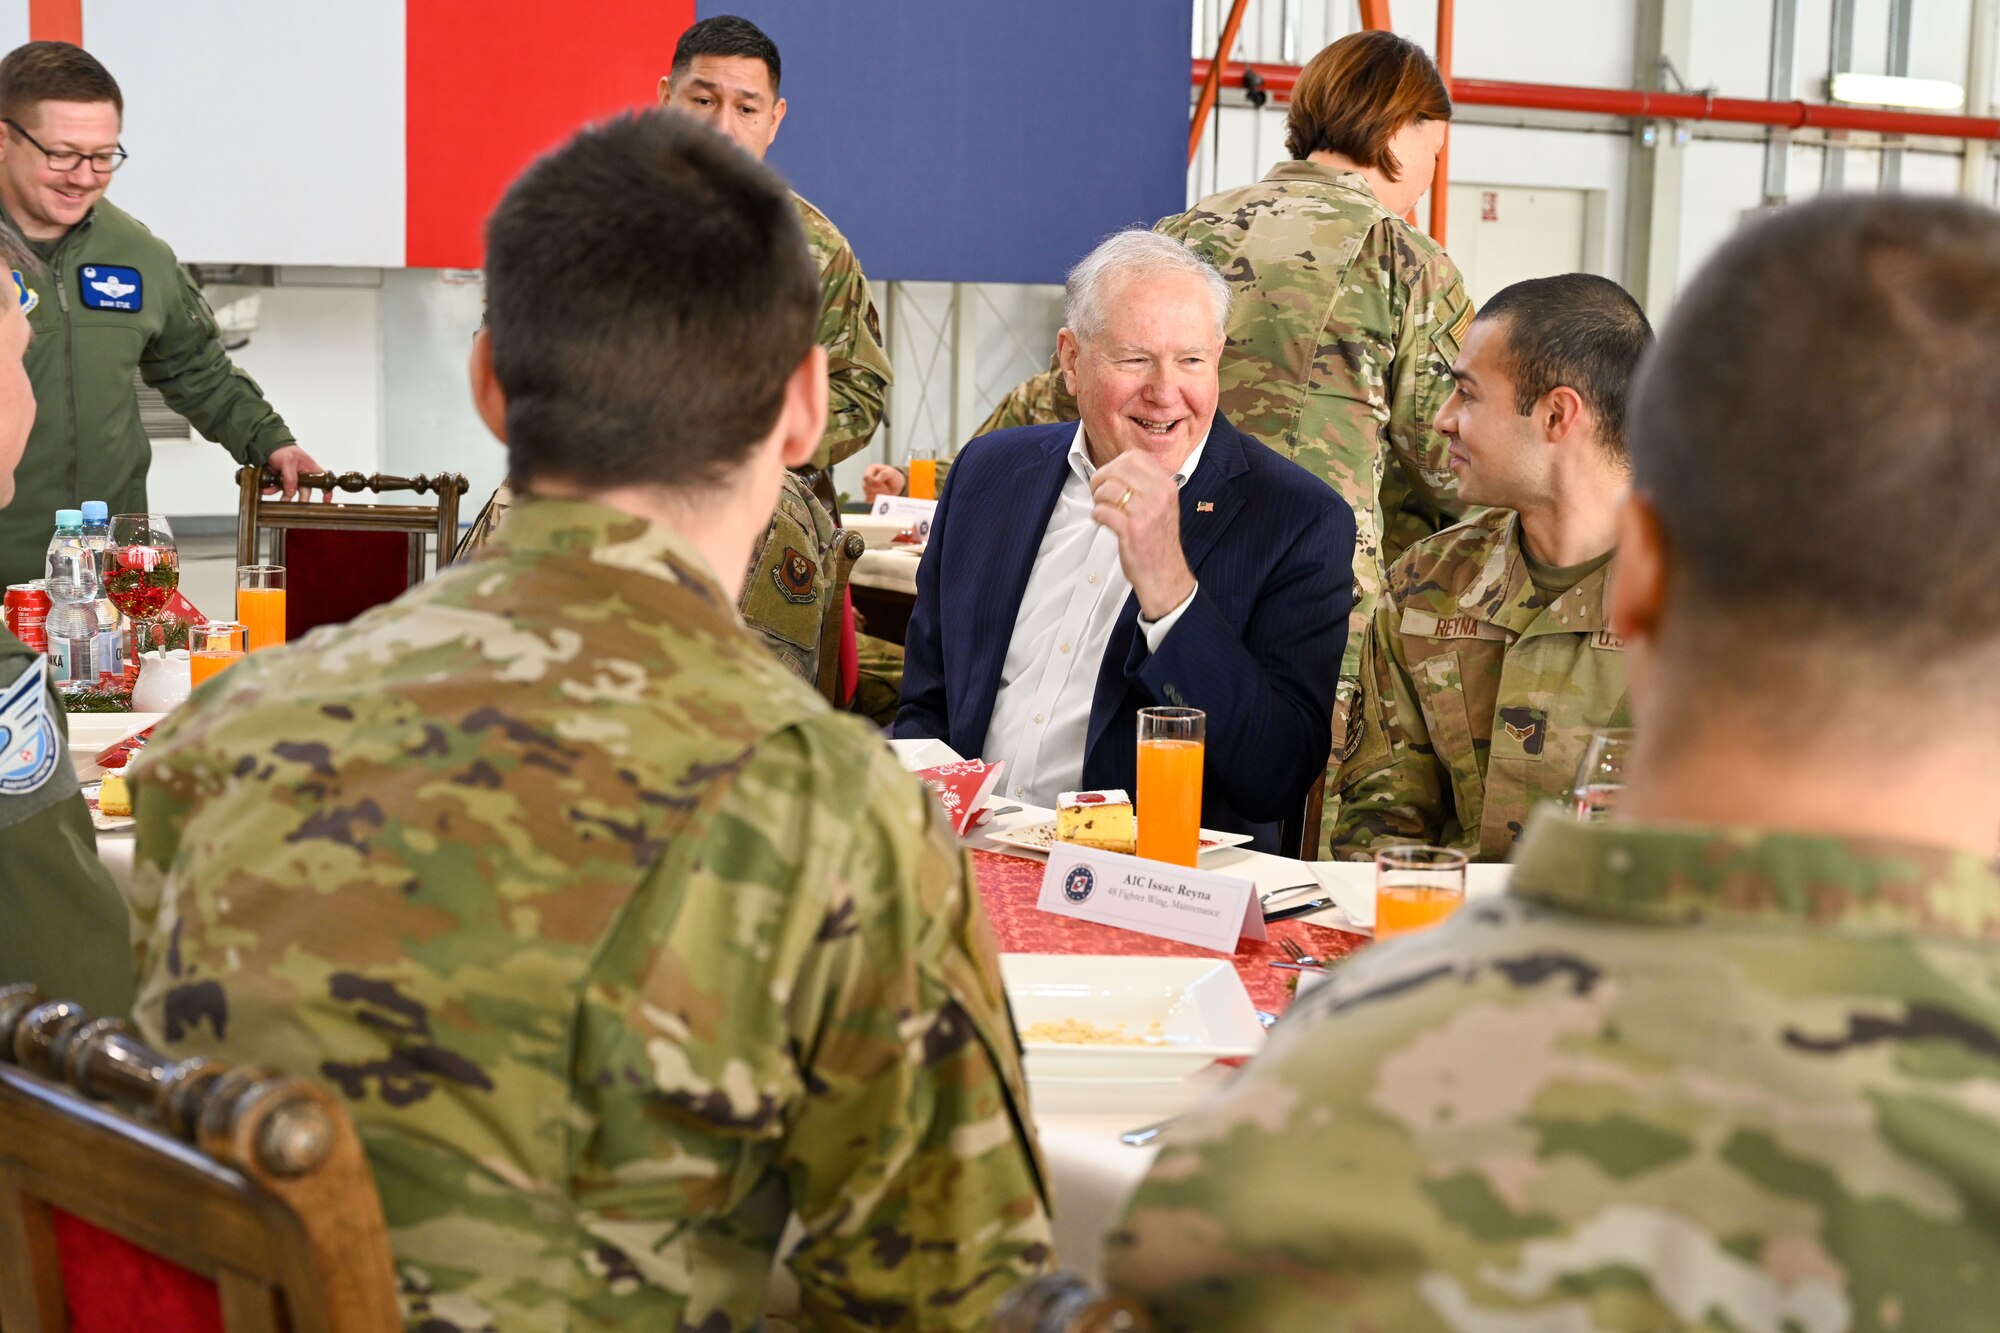 Military members interact sitting at a table